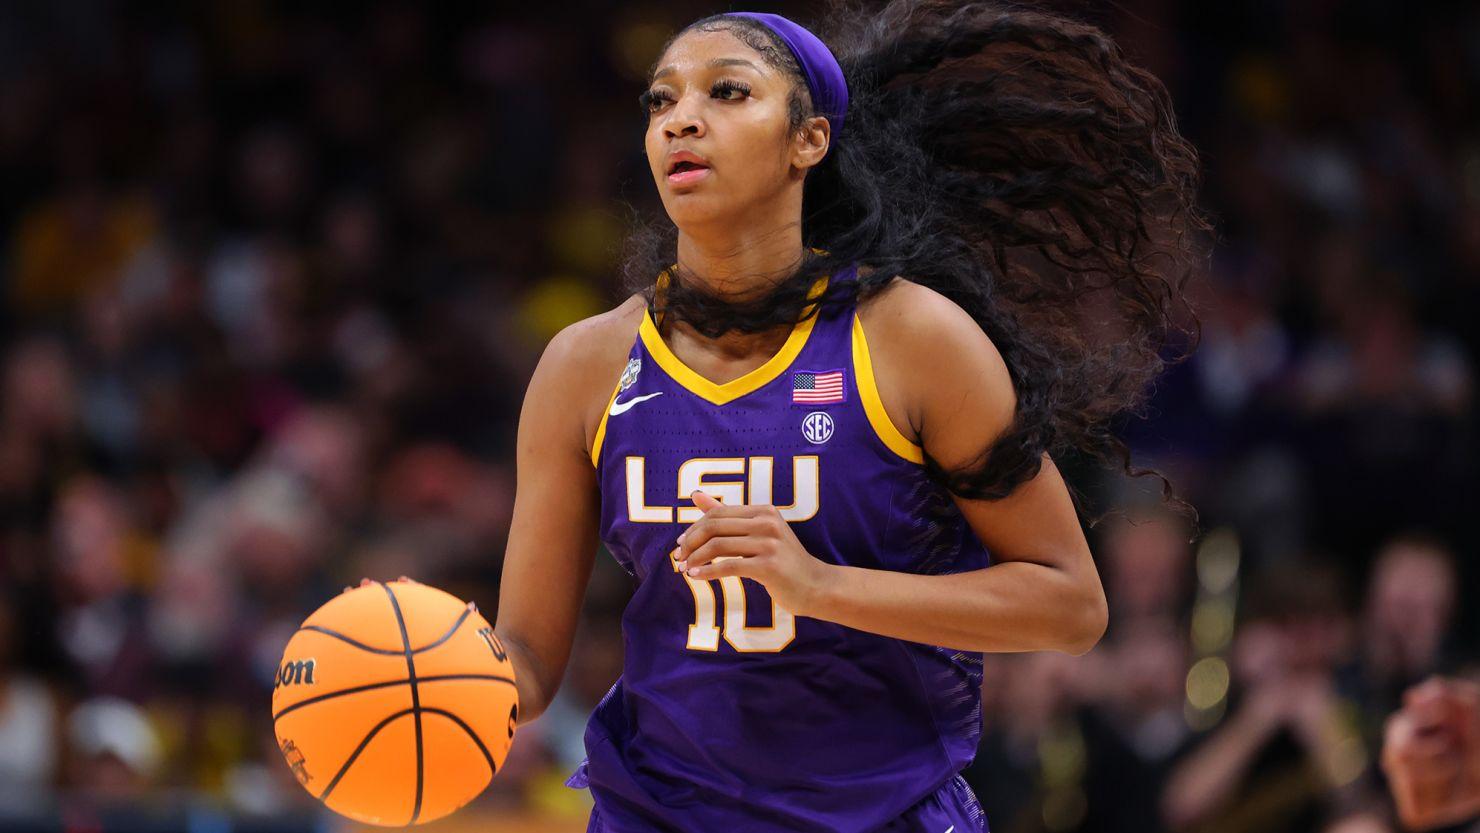 Angel Reese: Mystery still swirls around LSU forward's absence as star is set to play high-profile game Thursday | CNN